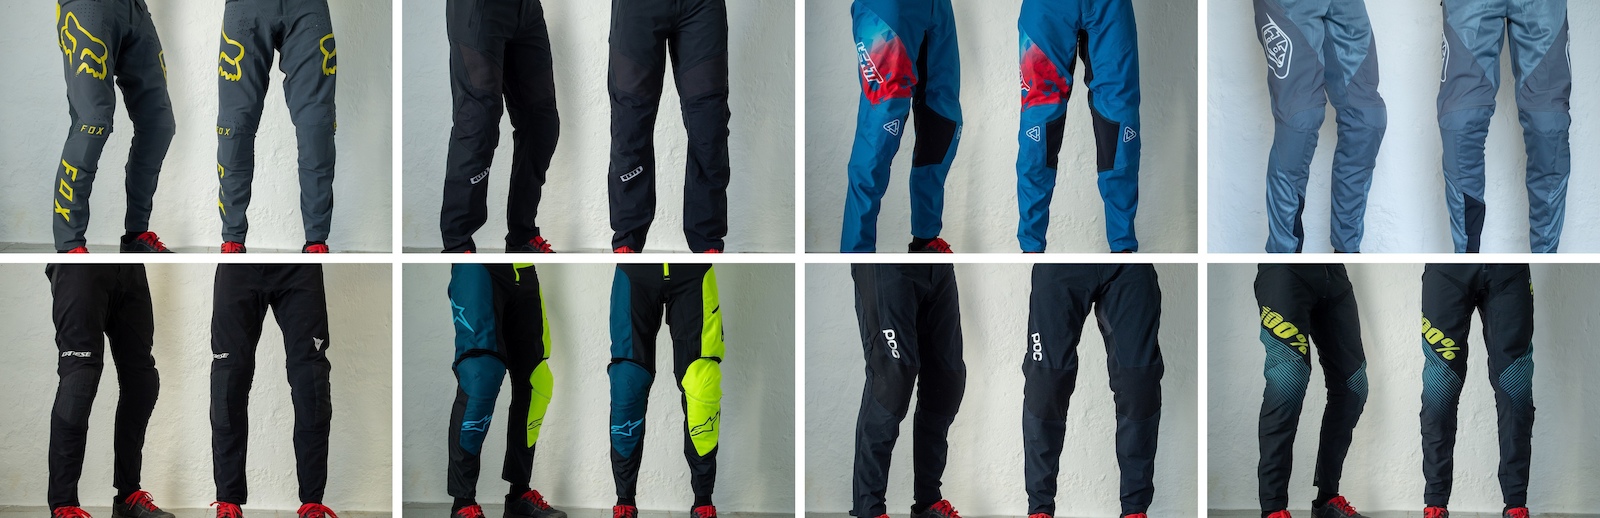 Mountain Bike Protective Gear: Pads, Body Armor, & More